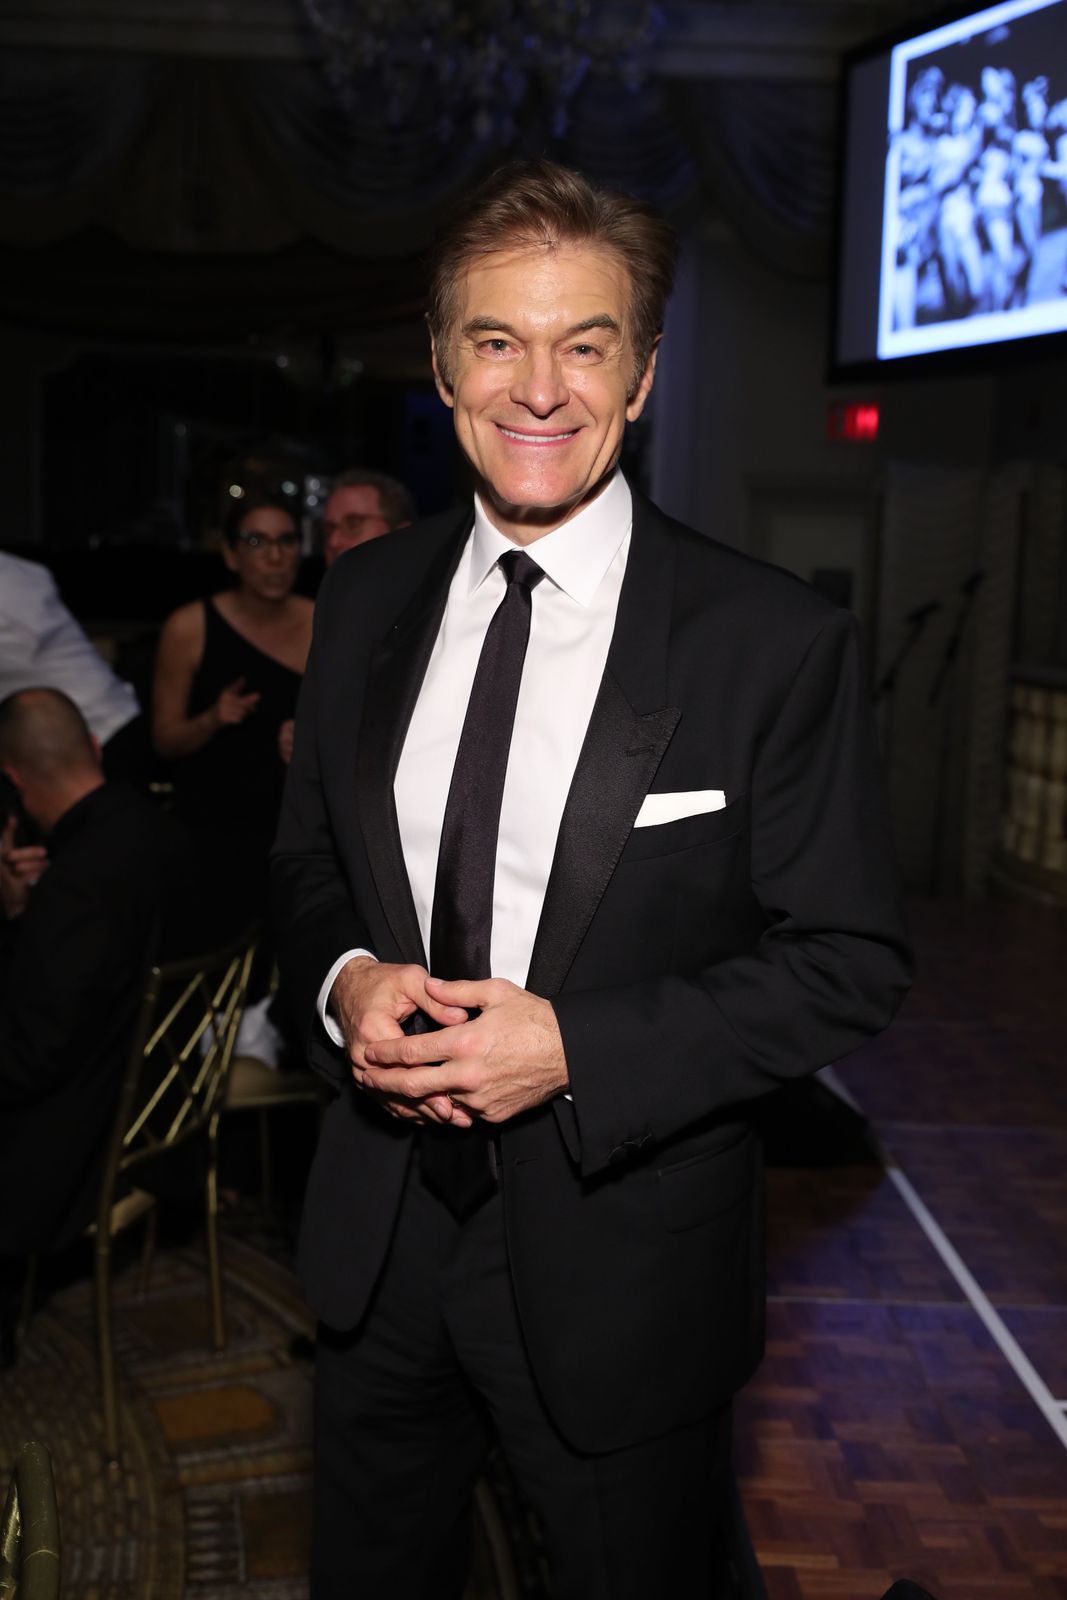 Mehmet Oz at the 7th Annual Order Of The Golden Sphinx Gala at The Pierre, A Taj Hotel on April 15, 2019. | Photo: Getty Images